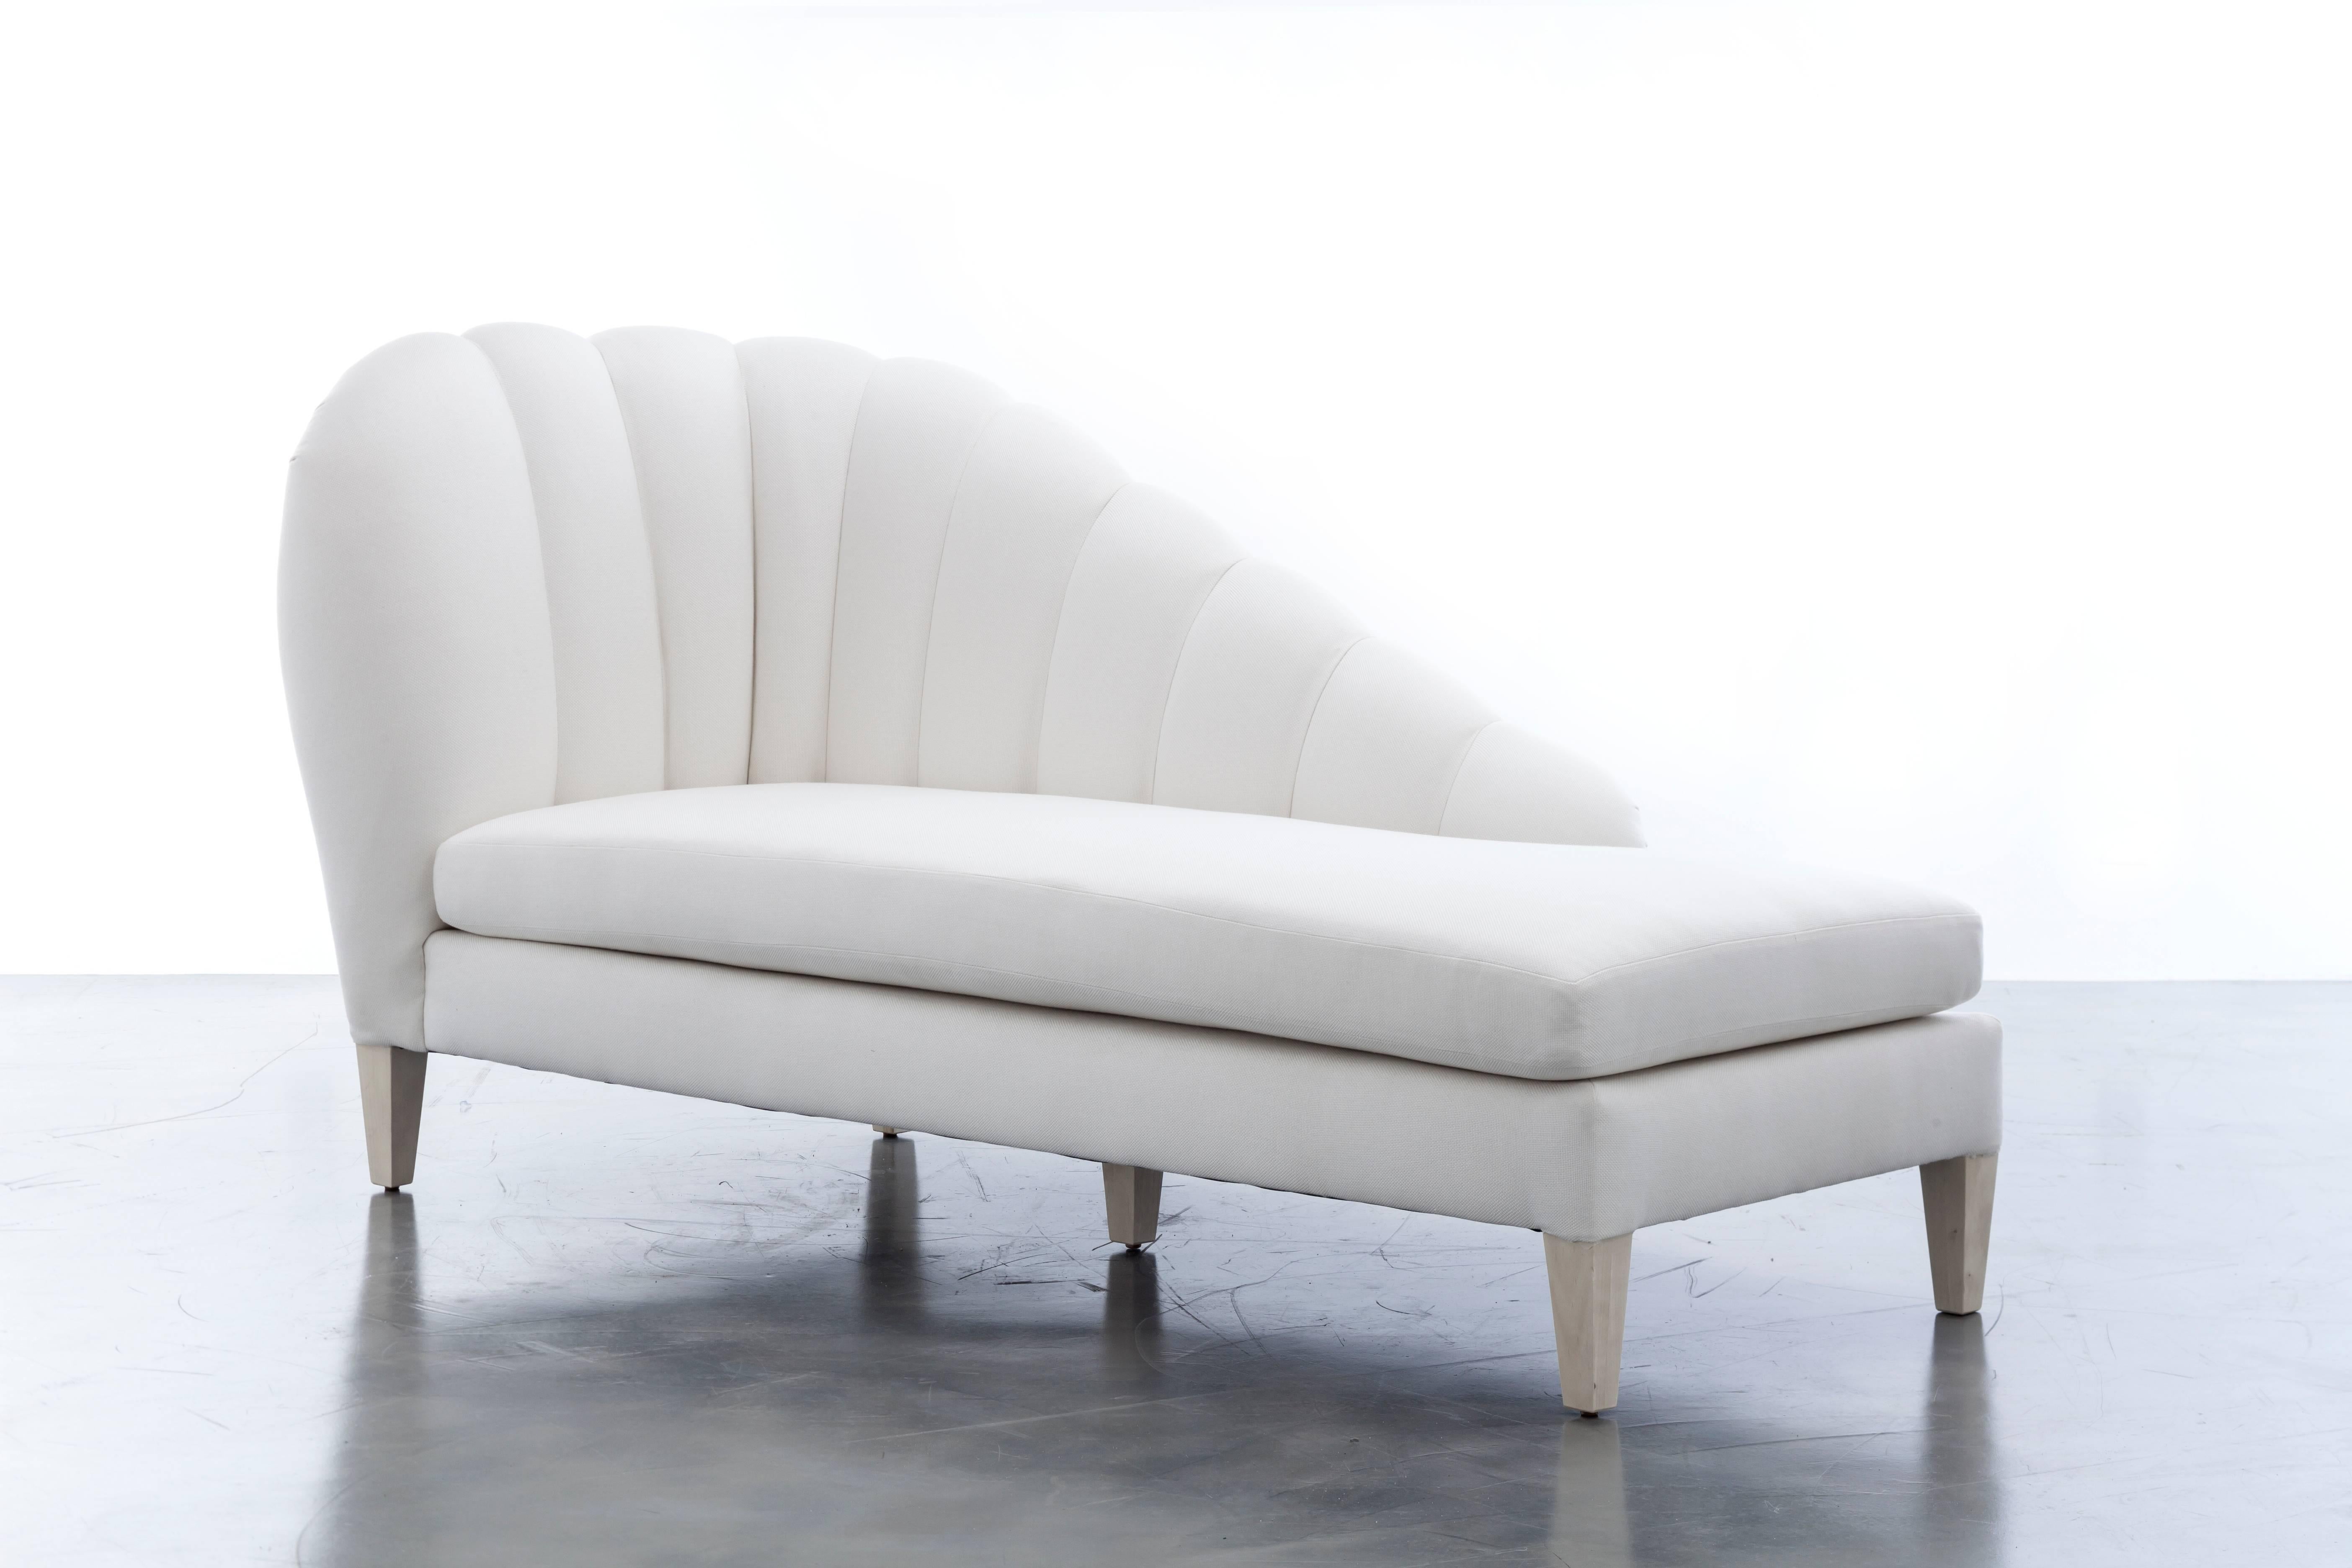 The Guinevere Chaise inspired by the curvature of Gaudi architecture features an asymmetrical channeled scalloped slope that meets and rests over four wooden legs.  Fully custom and made to order in California.  As shown in Bamboo White $9,200.00.